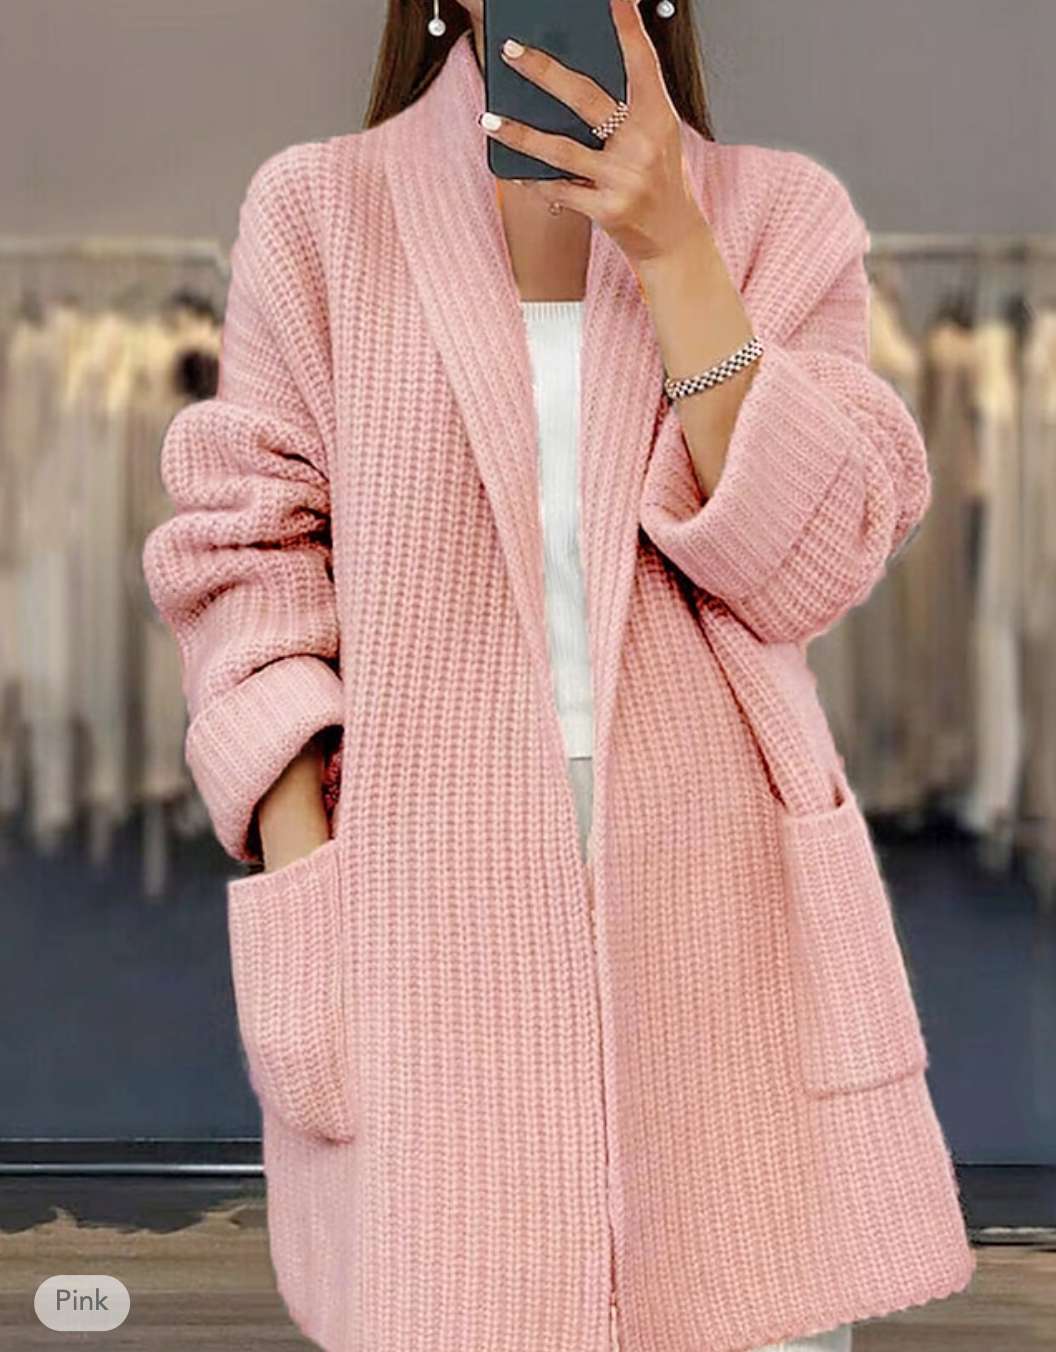 Women's Soft Knitted Cardigan Sweater w/ Front Side Pockets (Beige, Pink, Light Blue, Camel) - $15 shipped